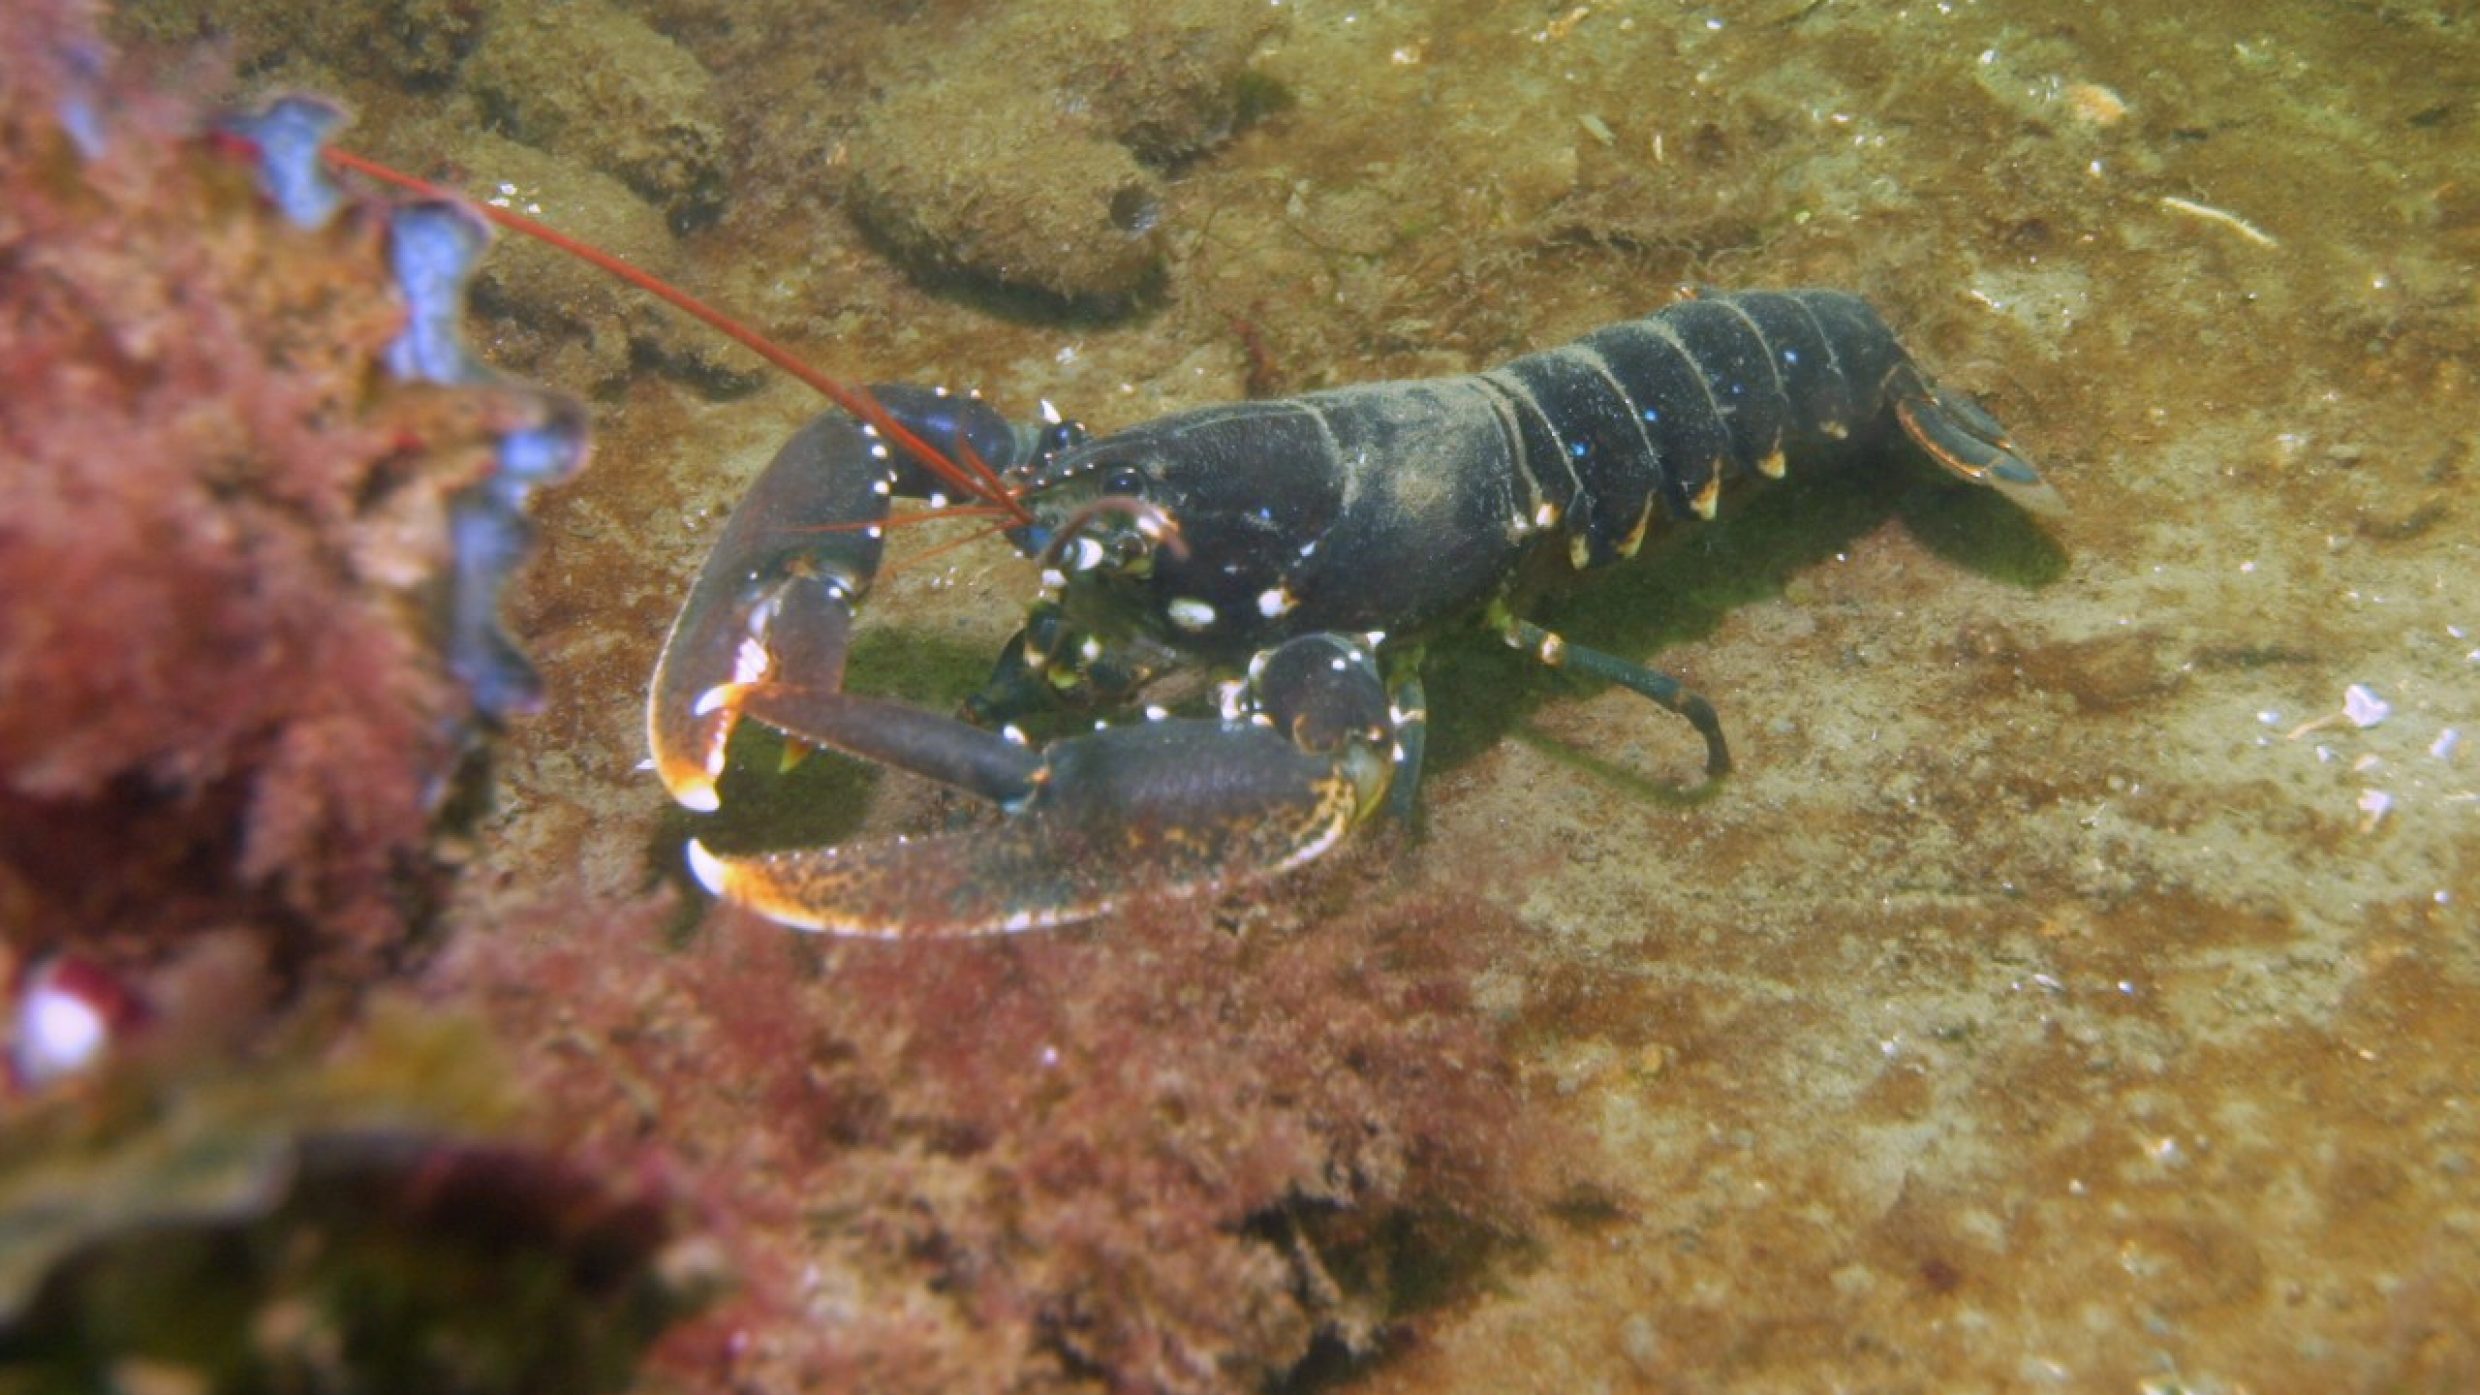 The oldest crustacean needs less food than other crabs, has slow digestion and takes a low-key approach to living. The oldest one on record was estimated to be 140 and was saved from the cooking pot in 2009. 